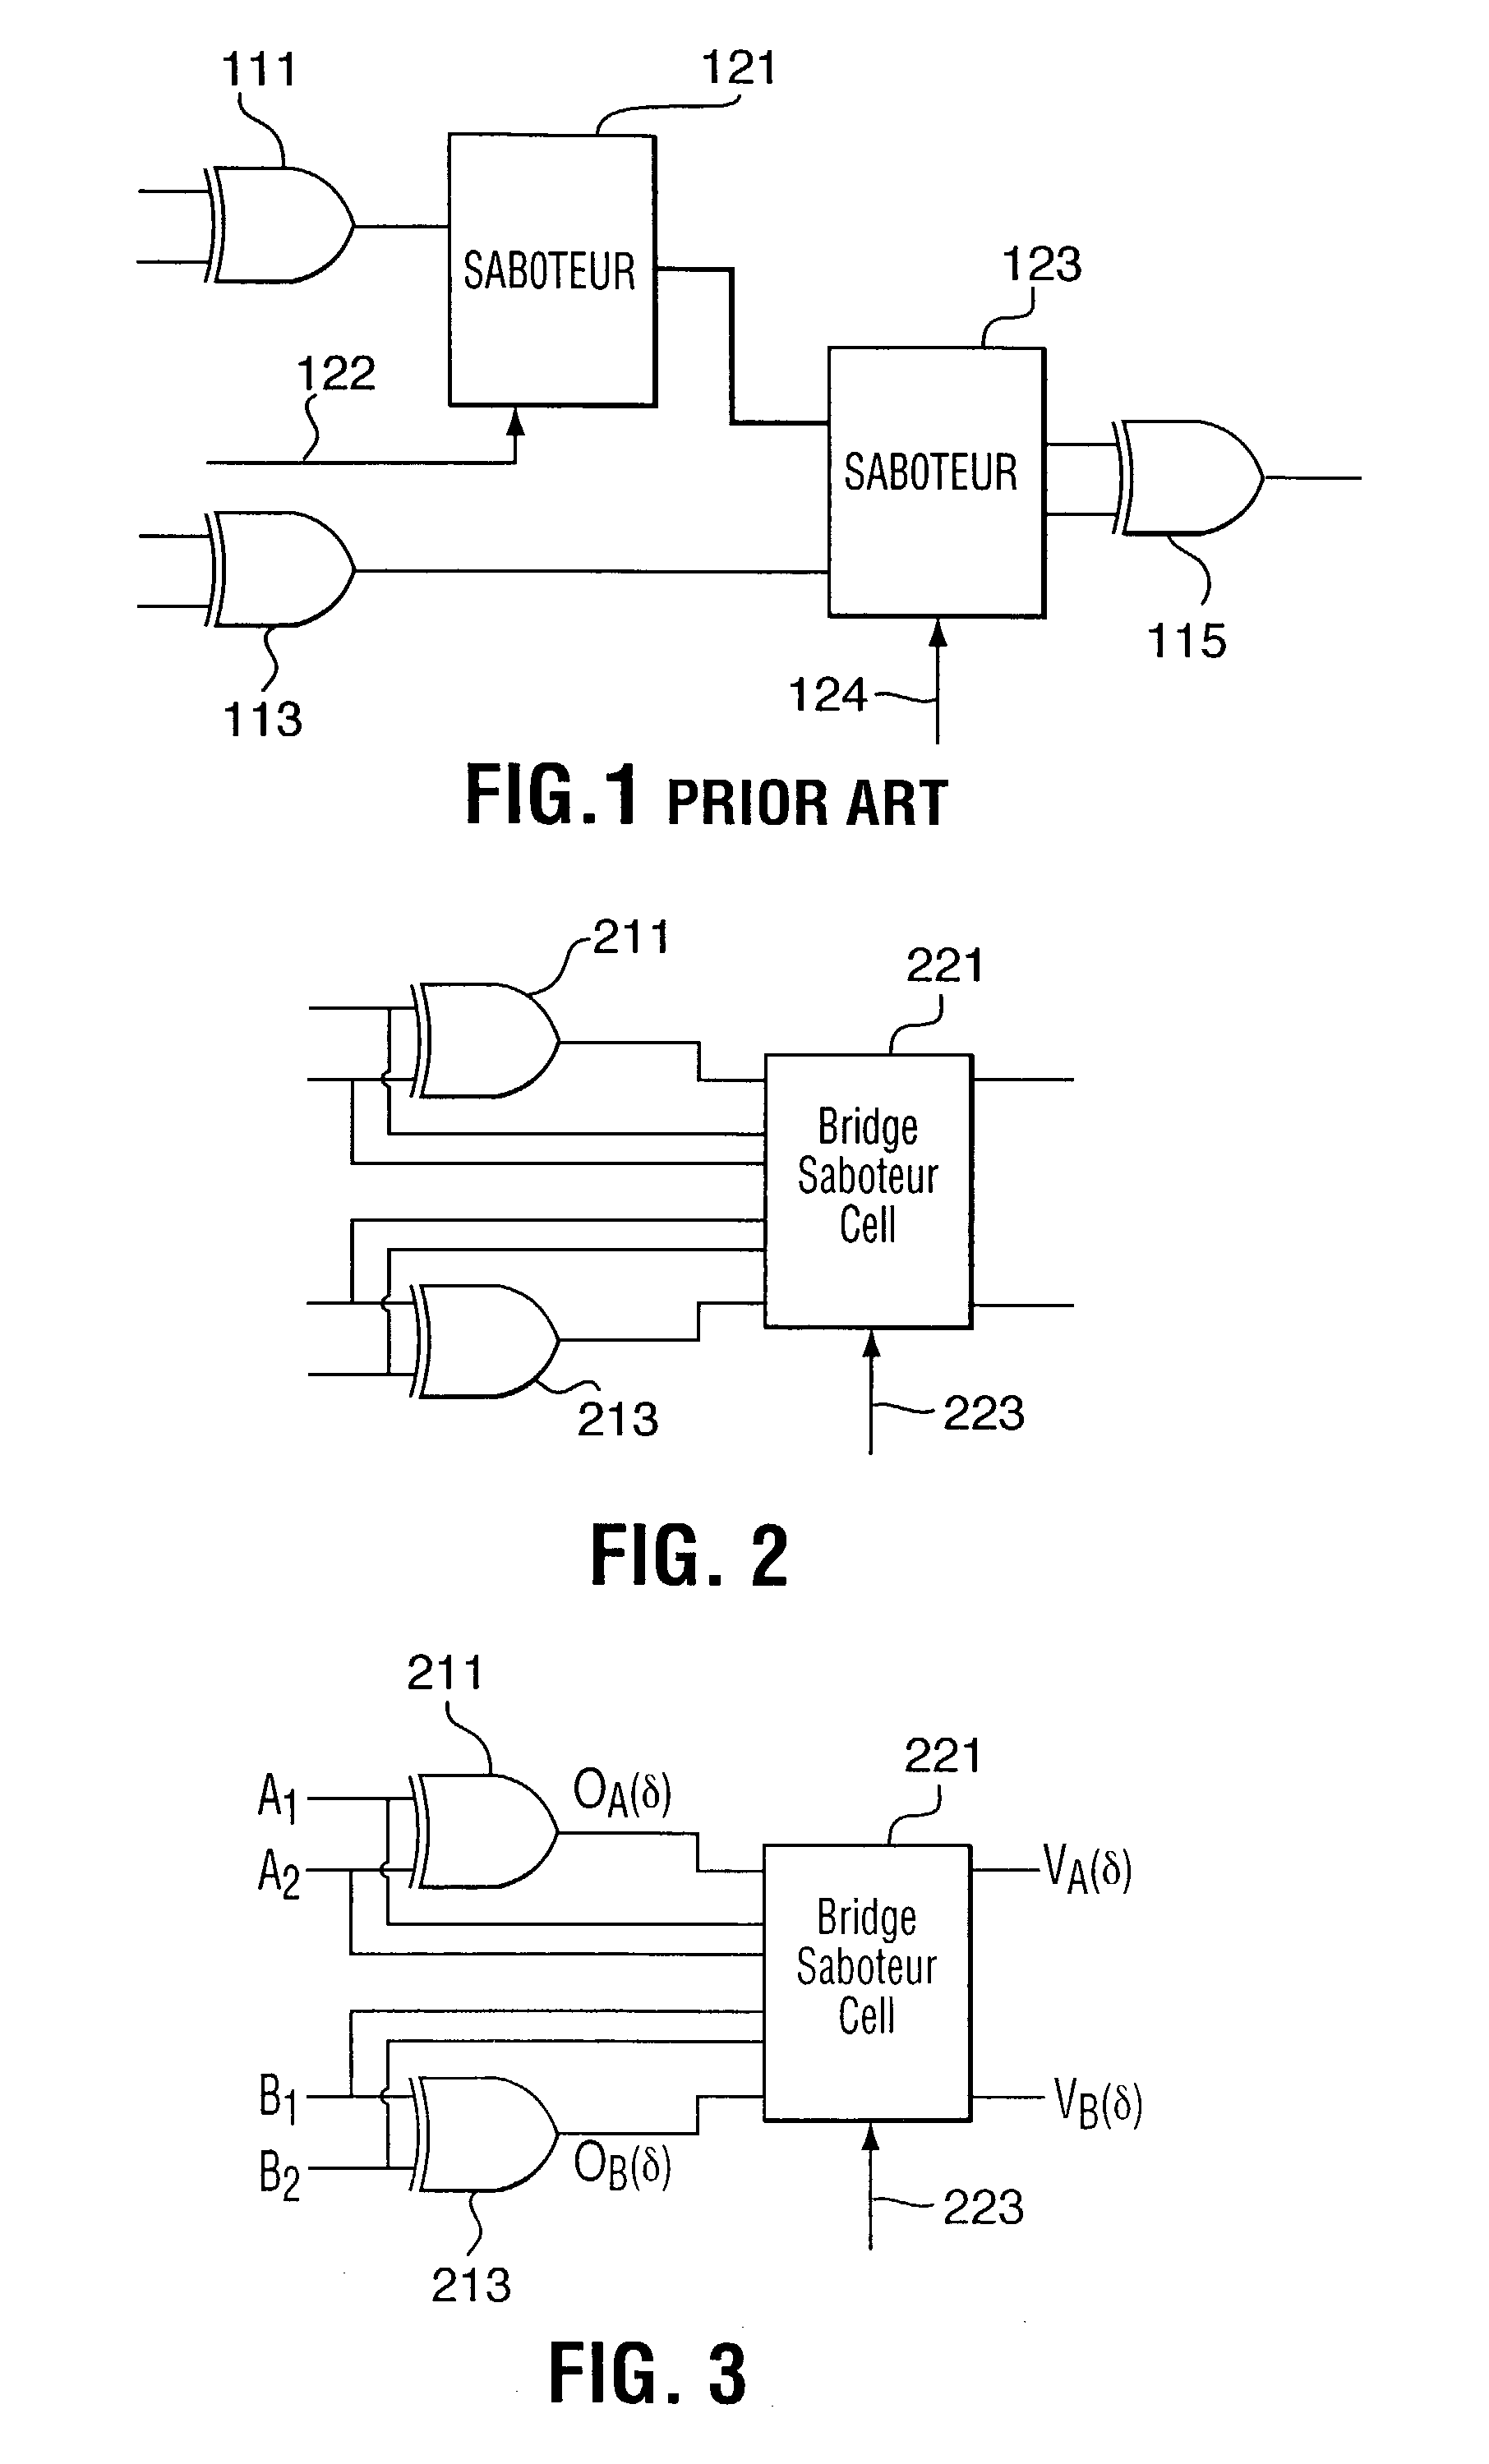 Method and apparatus for modeling and simulating the effects of bridge defects in integrated circuits